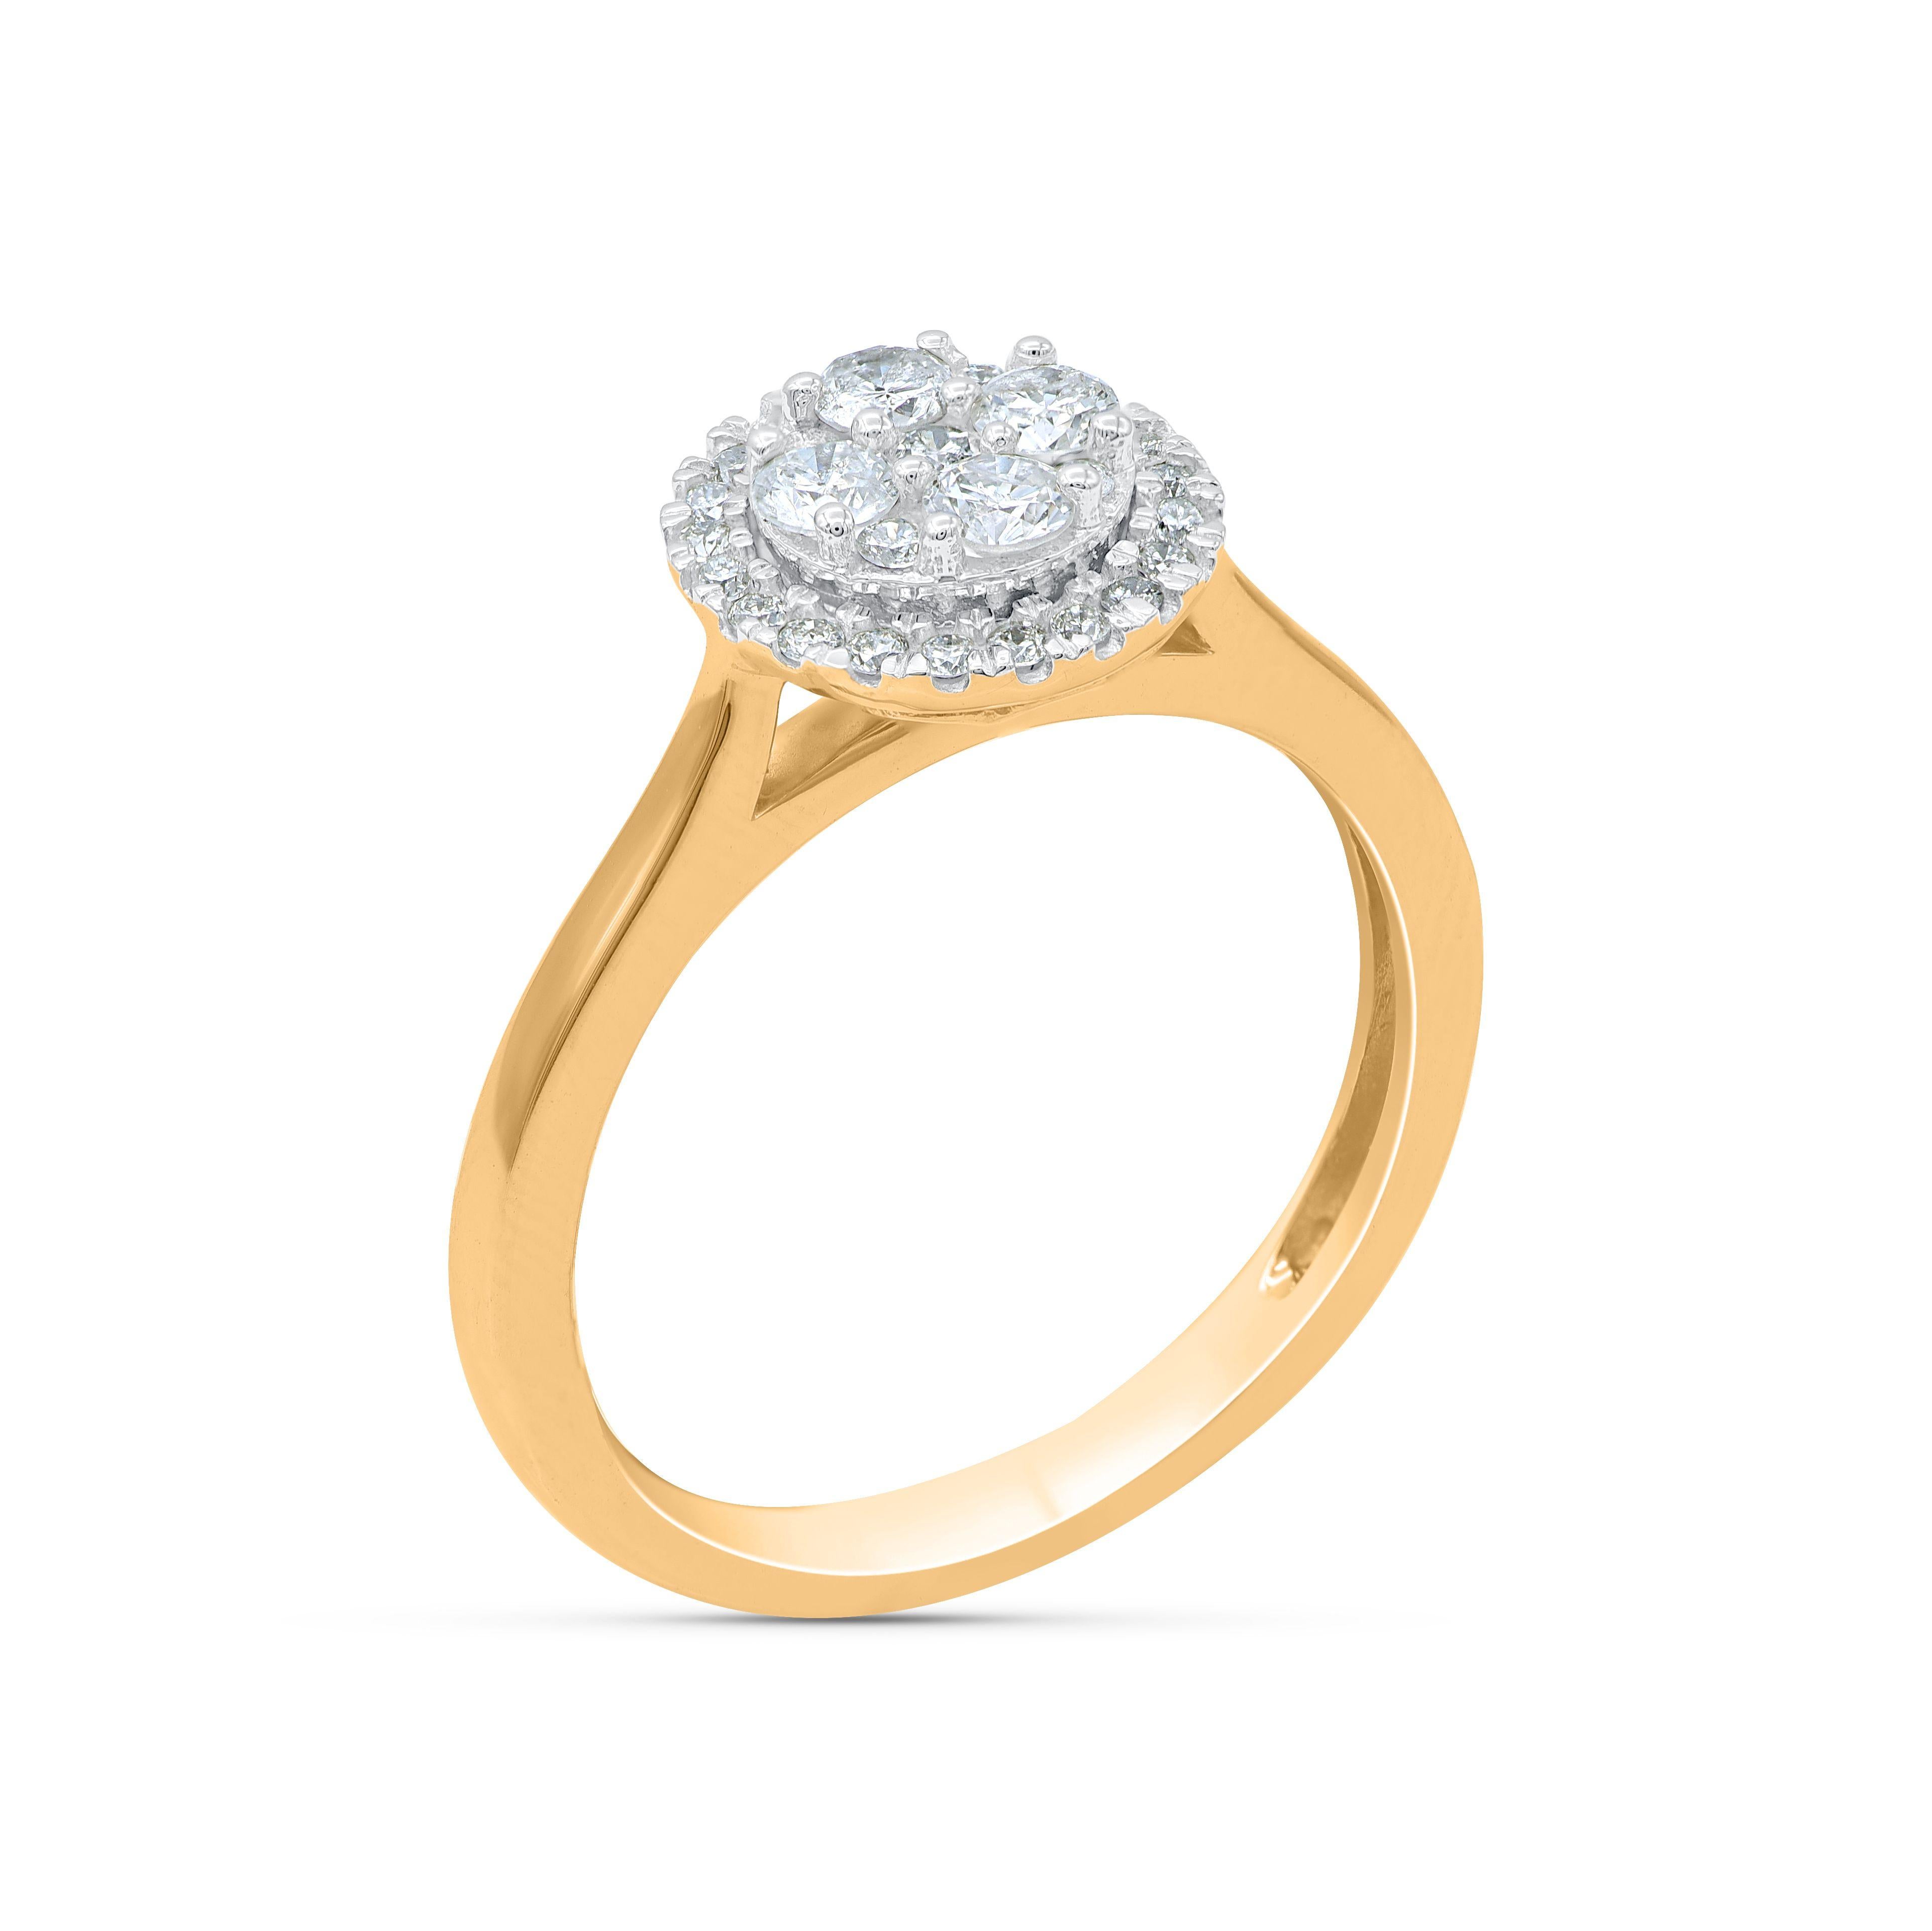 Handcrafted in 10 KT yellow gold and studded with 30 round-cut diamonds in micro-prong and pressure setting. The diamonds are graded H-I Color, I2 Clarity. This ring is available in multiple sizes
